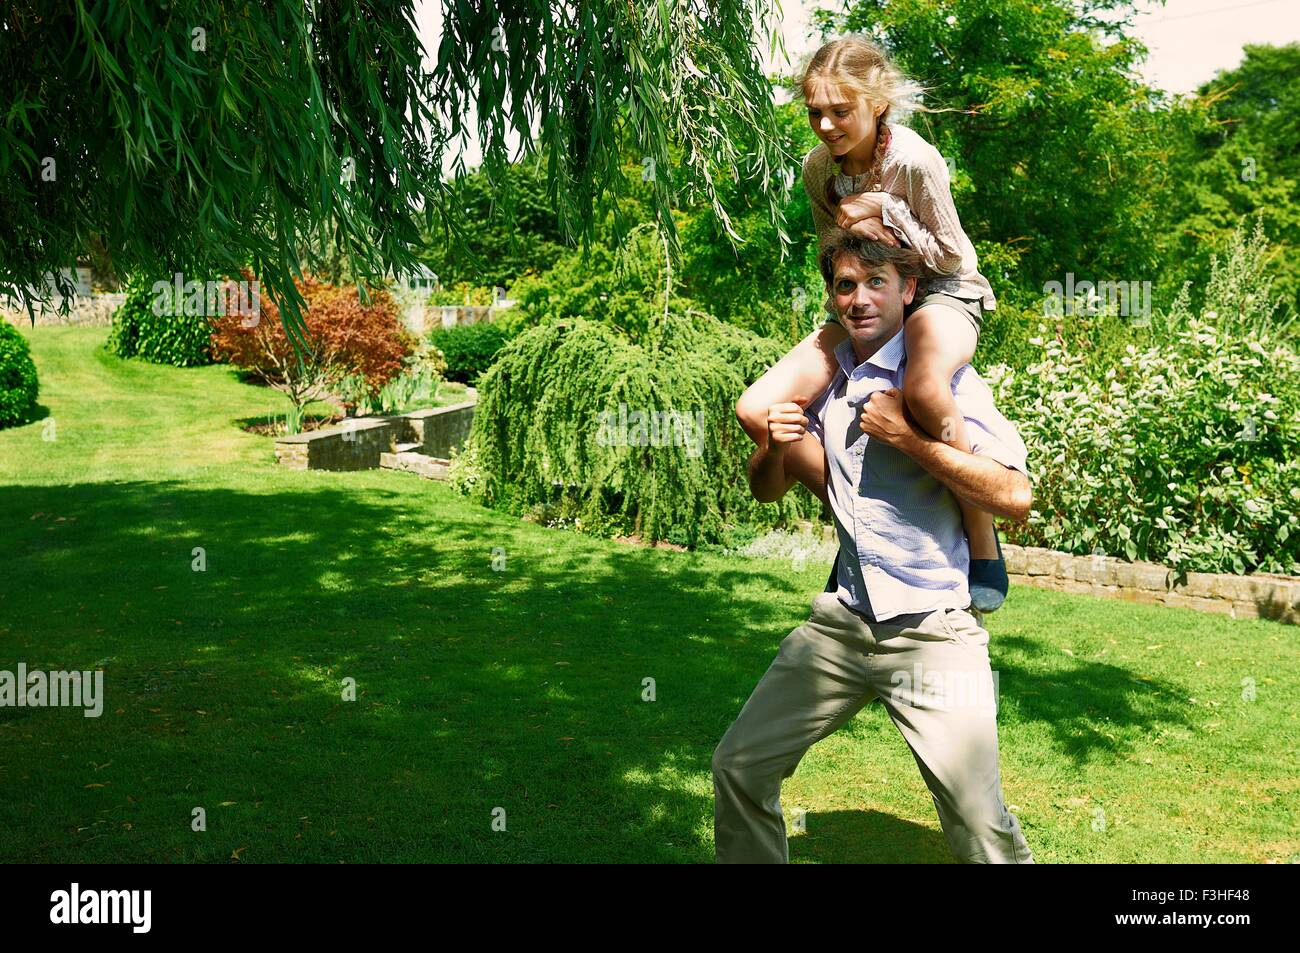 Mature man running with daughter on his shoulders in garden Stock Photo